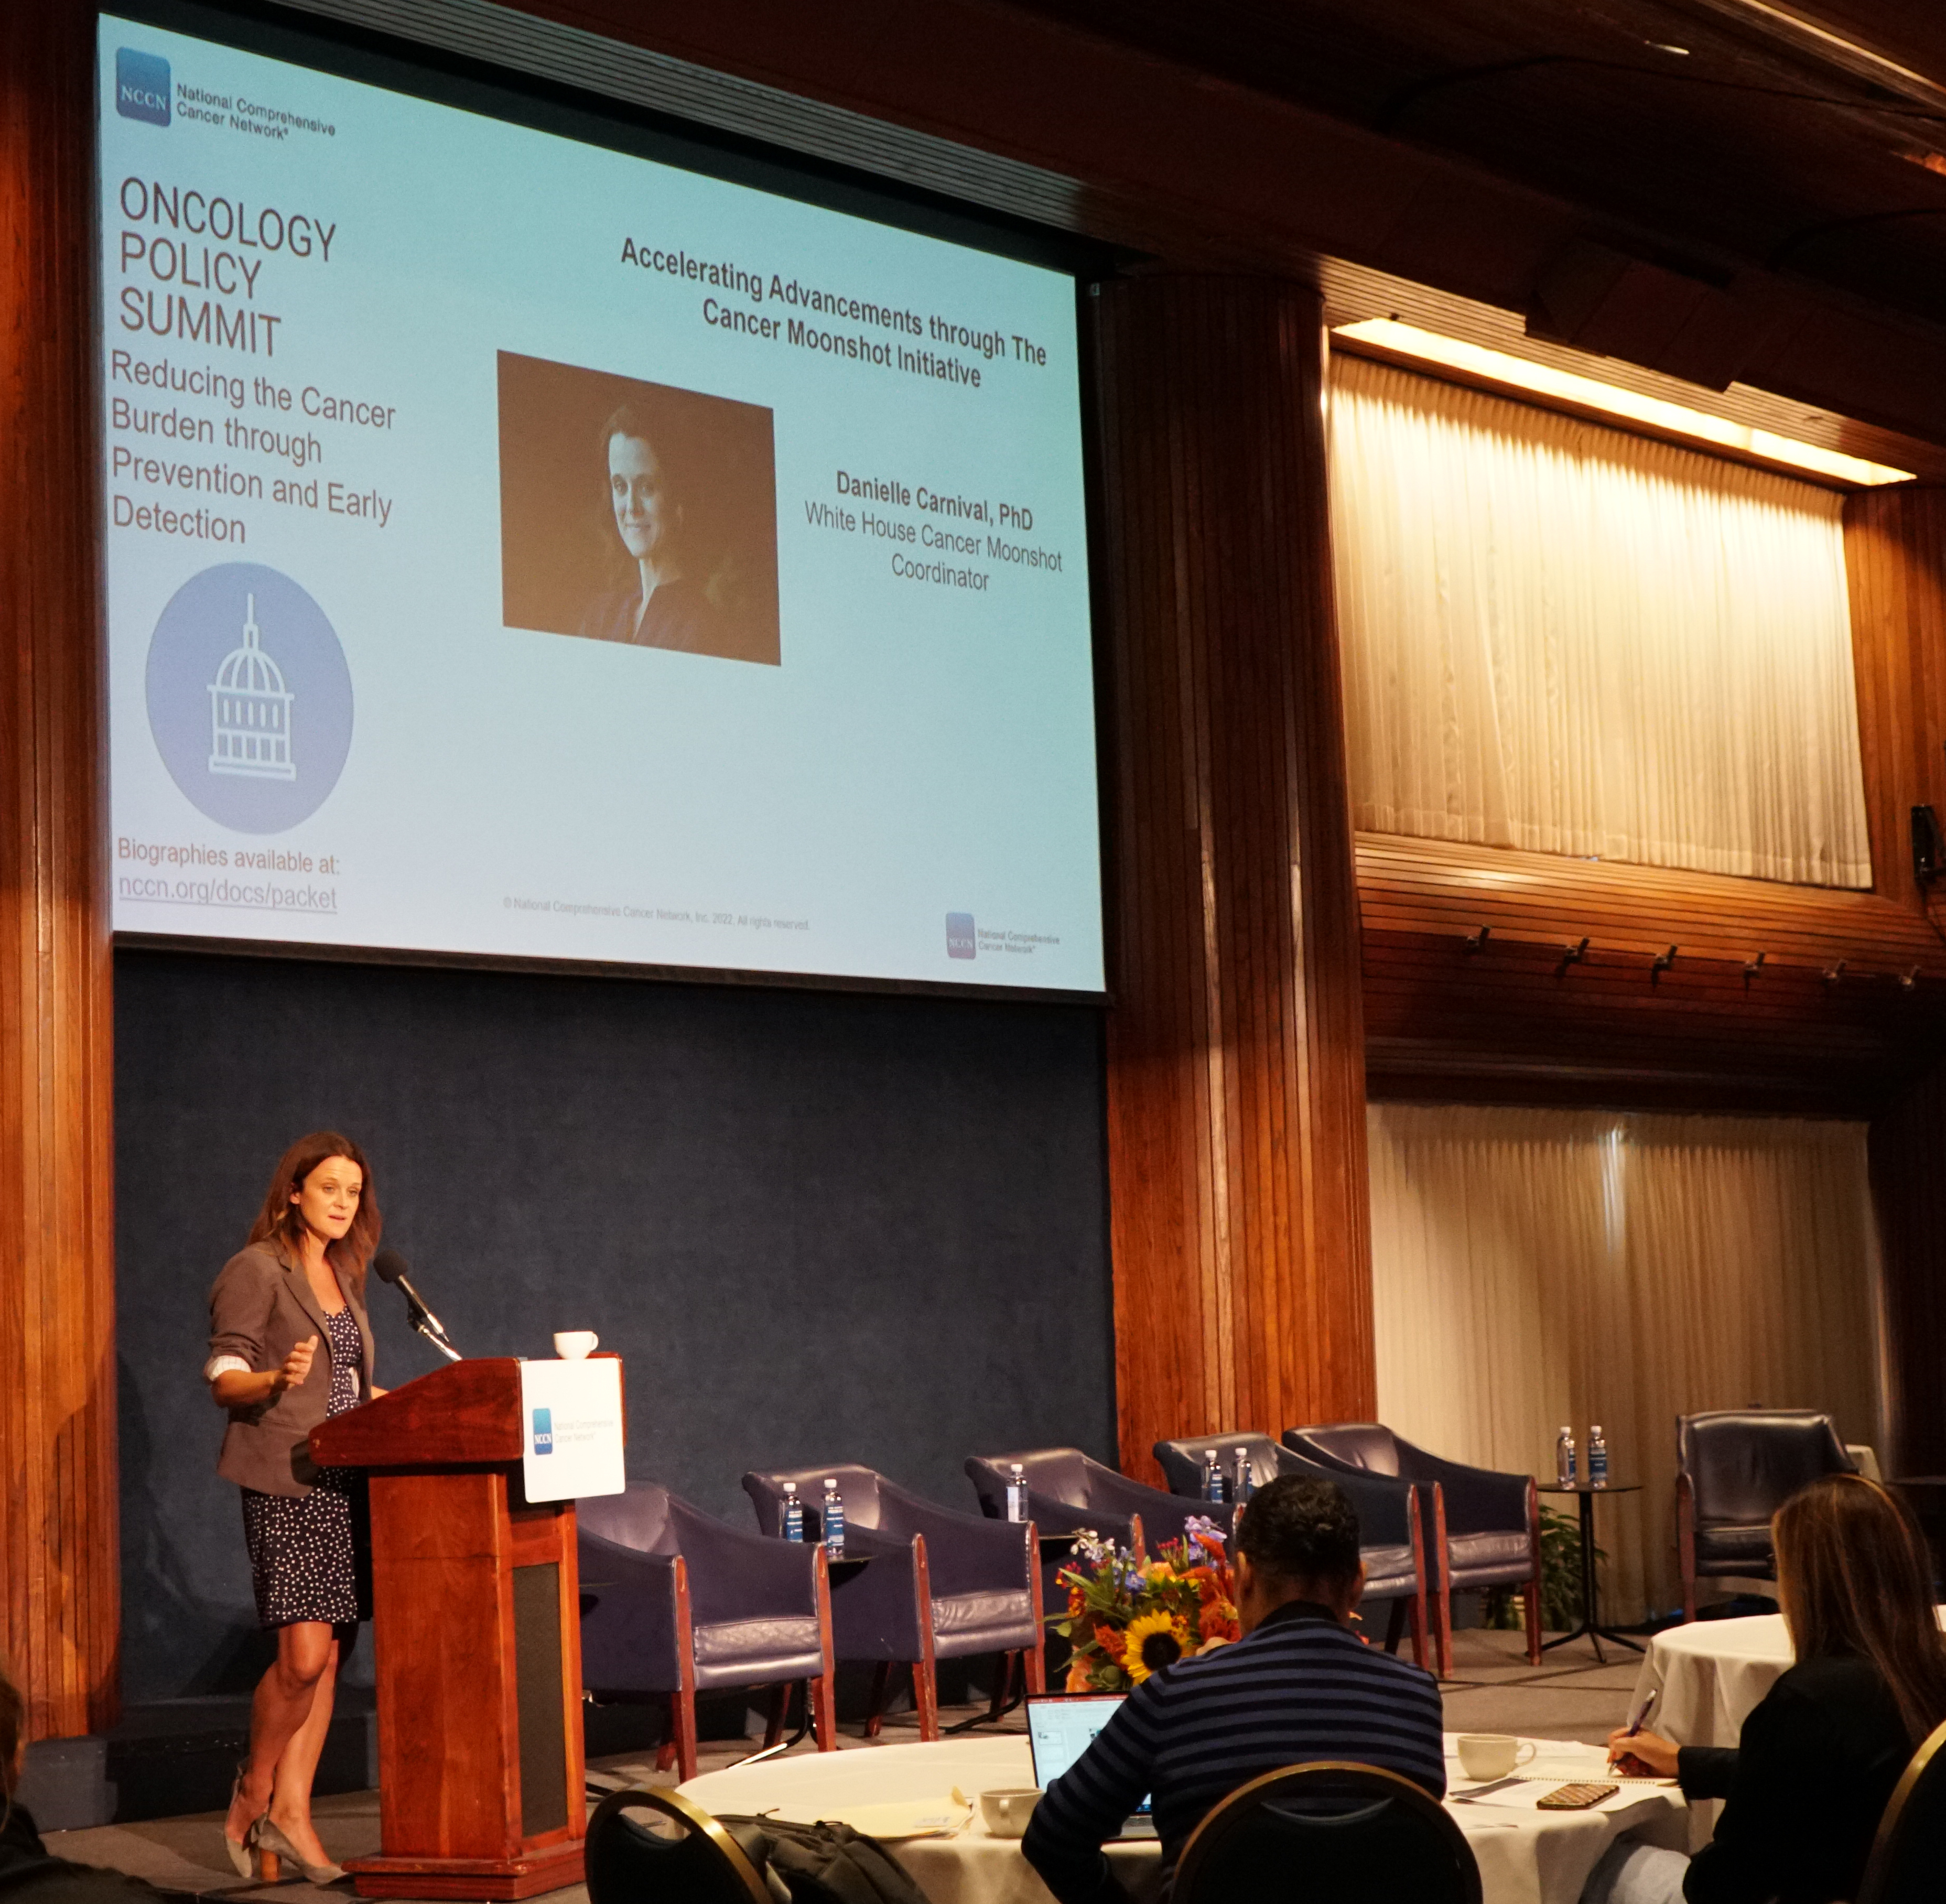 Dr. Danielle Carnival, White House Moonshot Coordinator, addresses the audience at the NCCN Policy Summit.